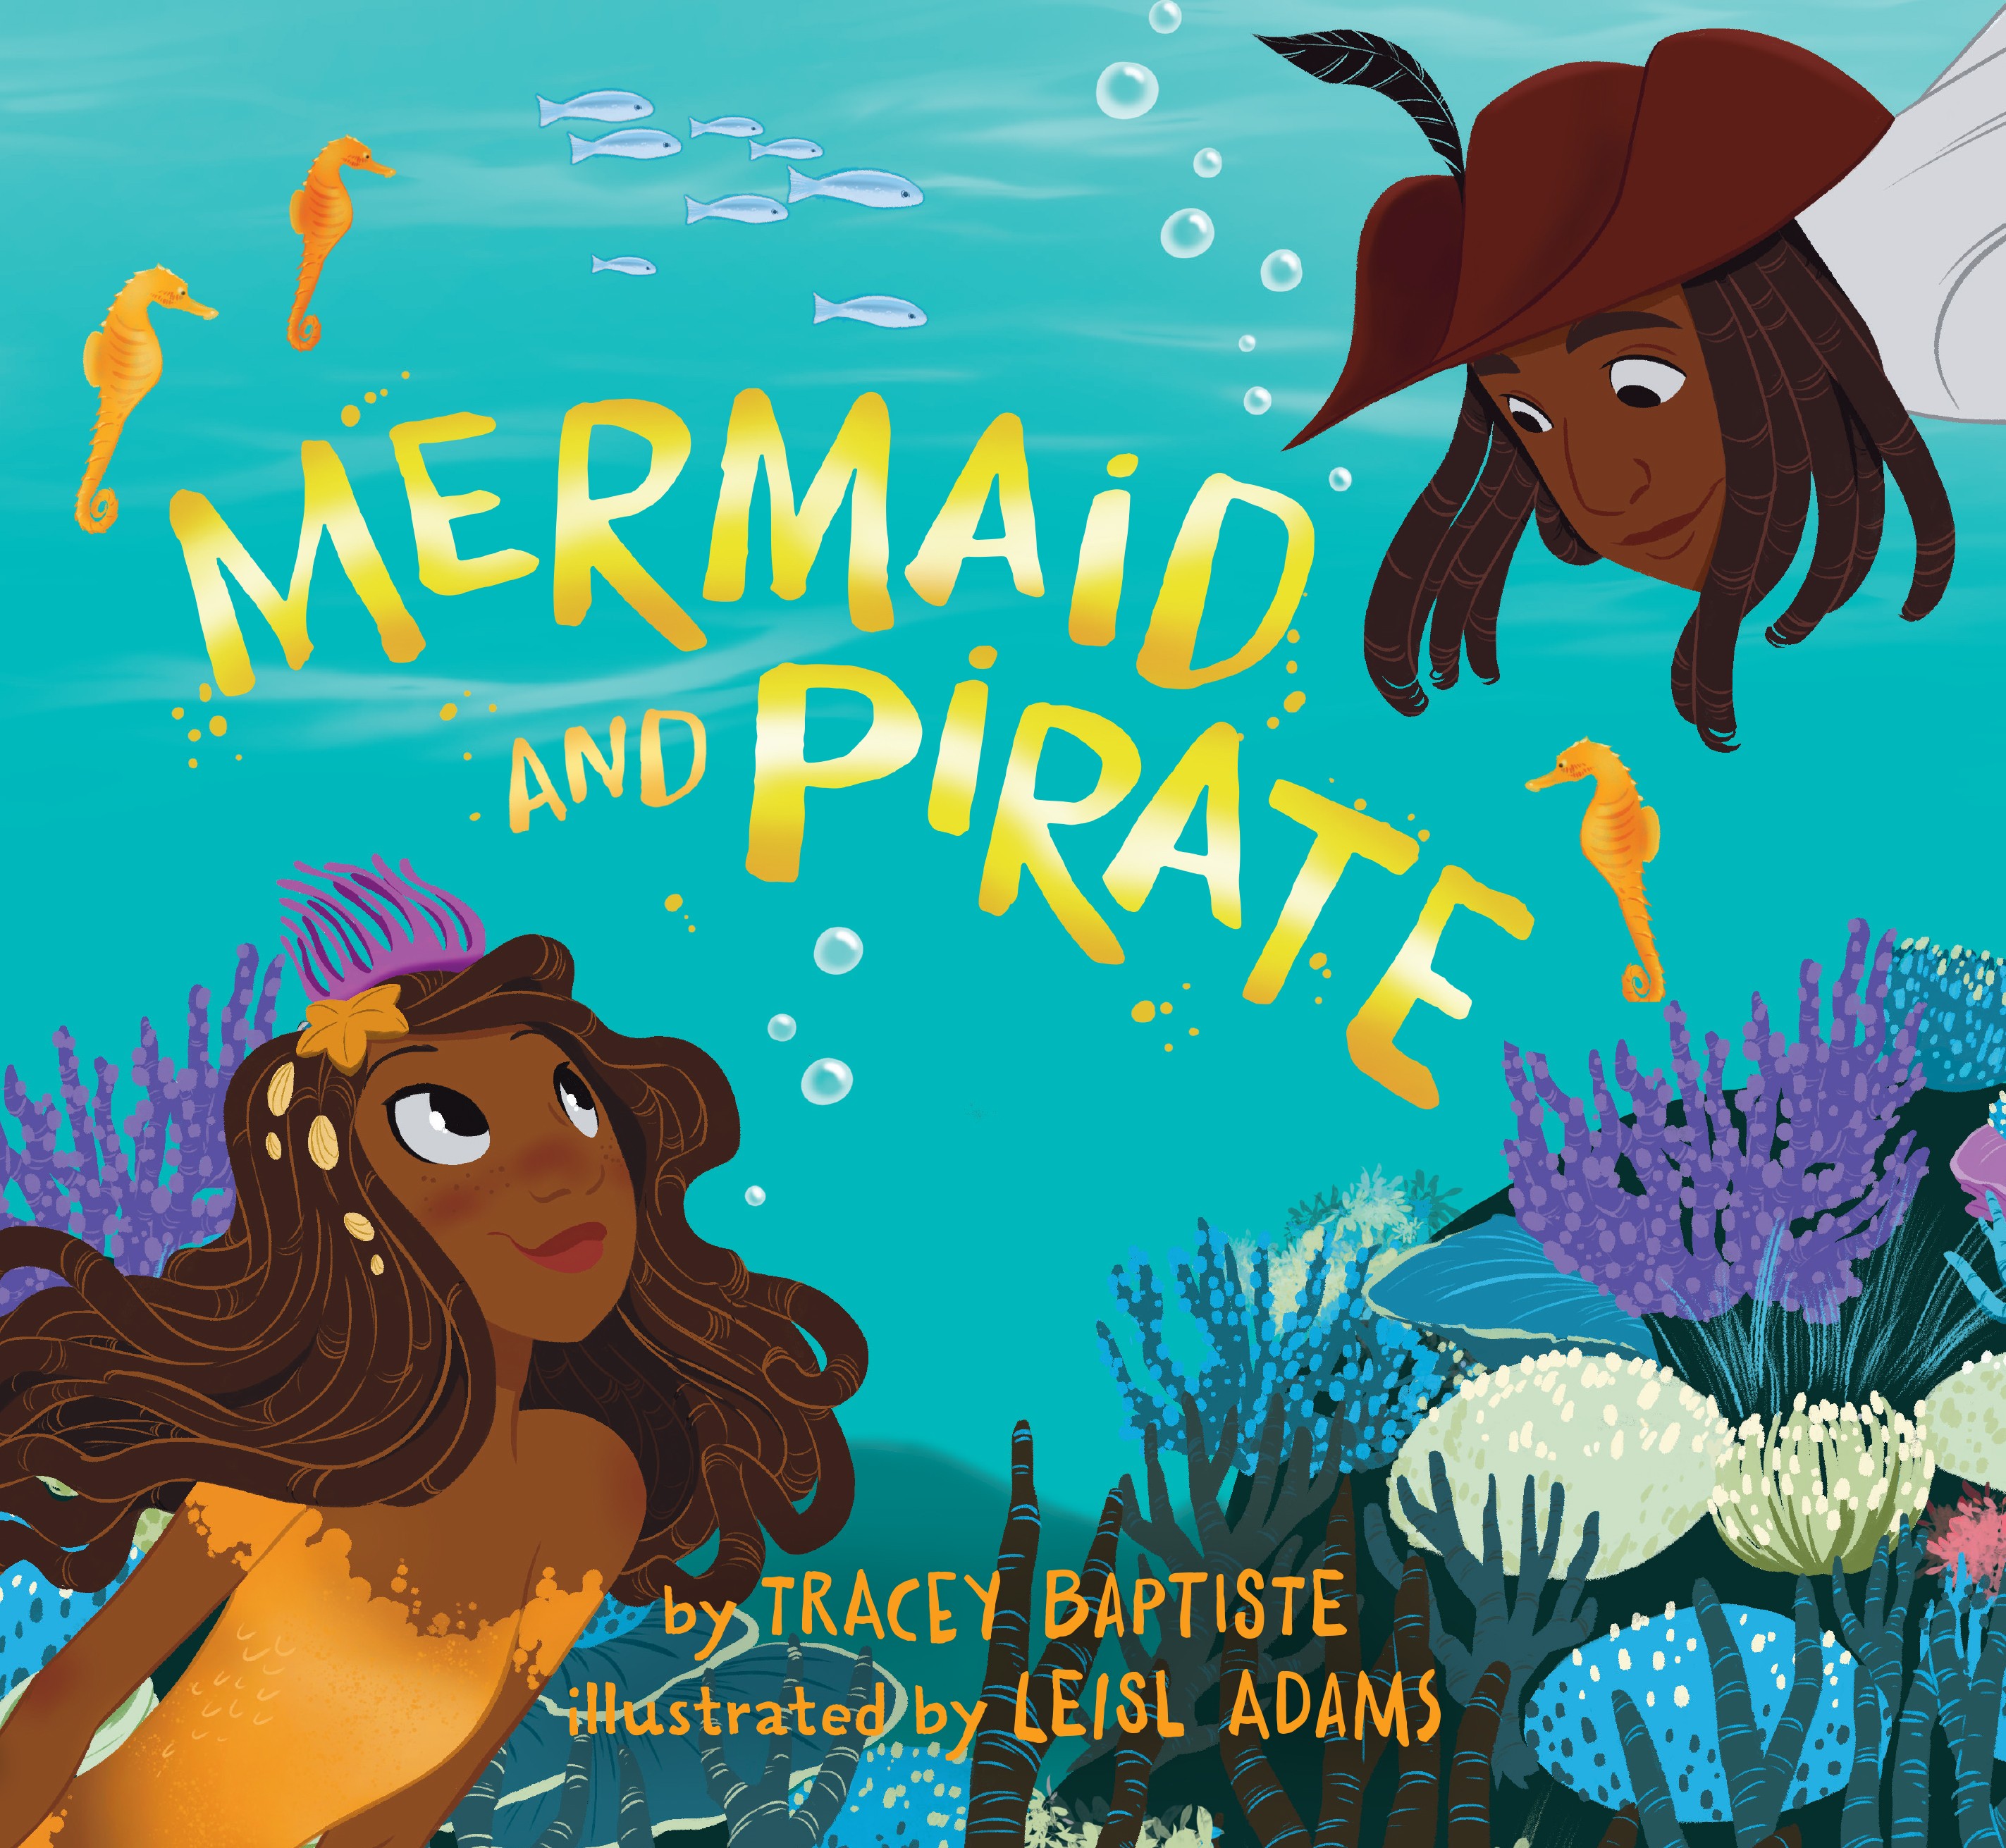 Cover image of Mermaid and Pirate. Blue cover with Black mermaid and Black pirate looking at each other with a background of sea creatures such as crabs, coral, and fish.